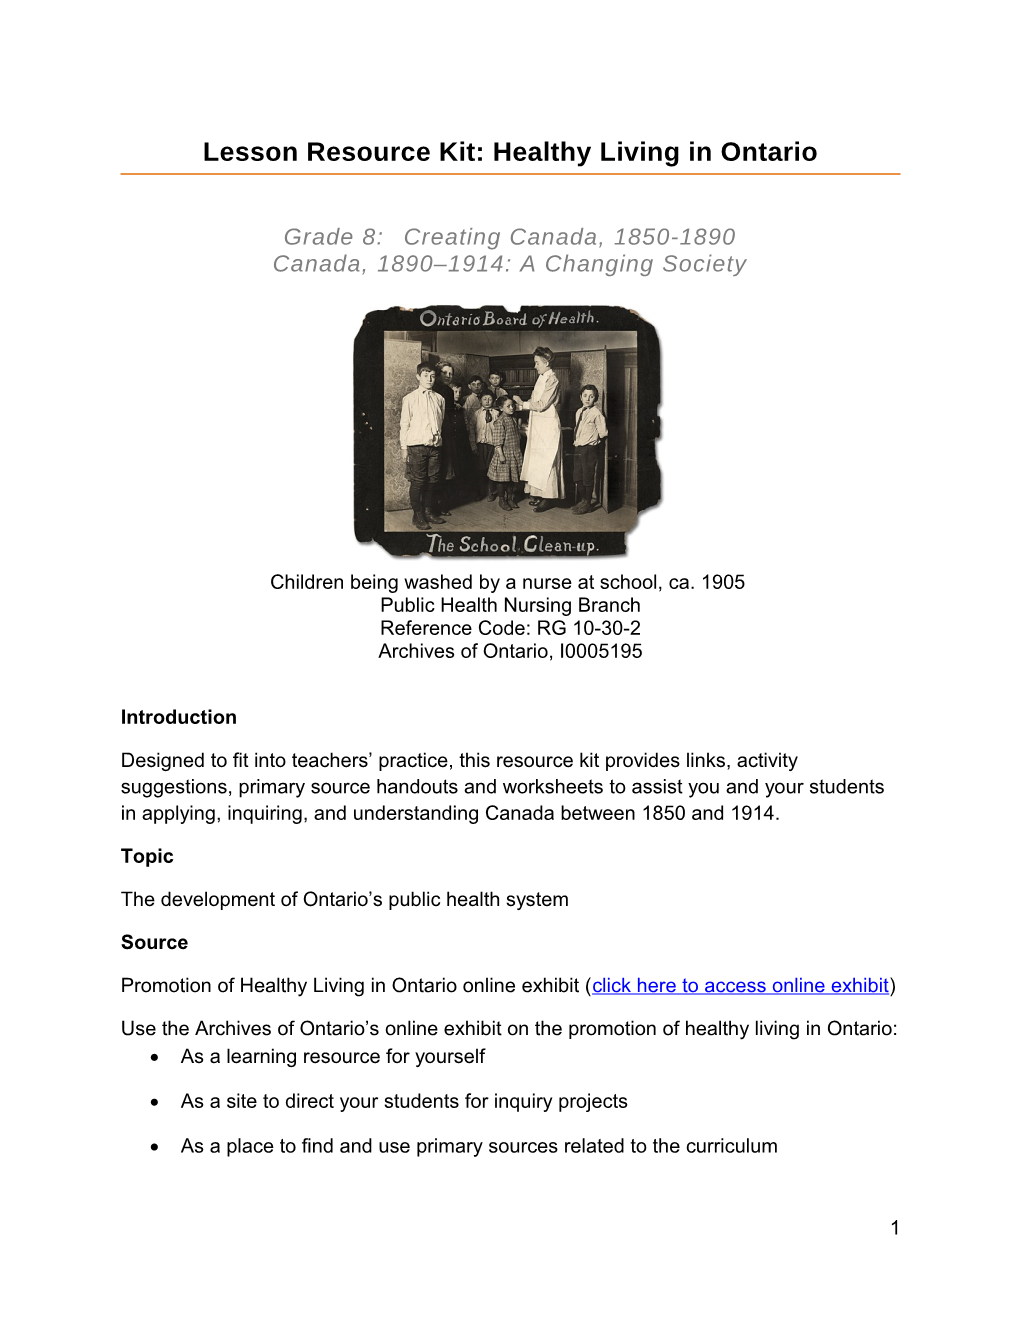 Lesson Resource Kit: Healthy Living in Ontario Grade 8: Creating Canada, 1850-1890